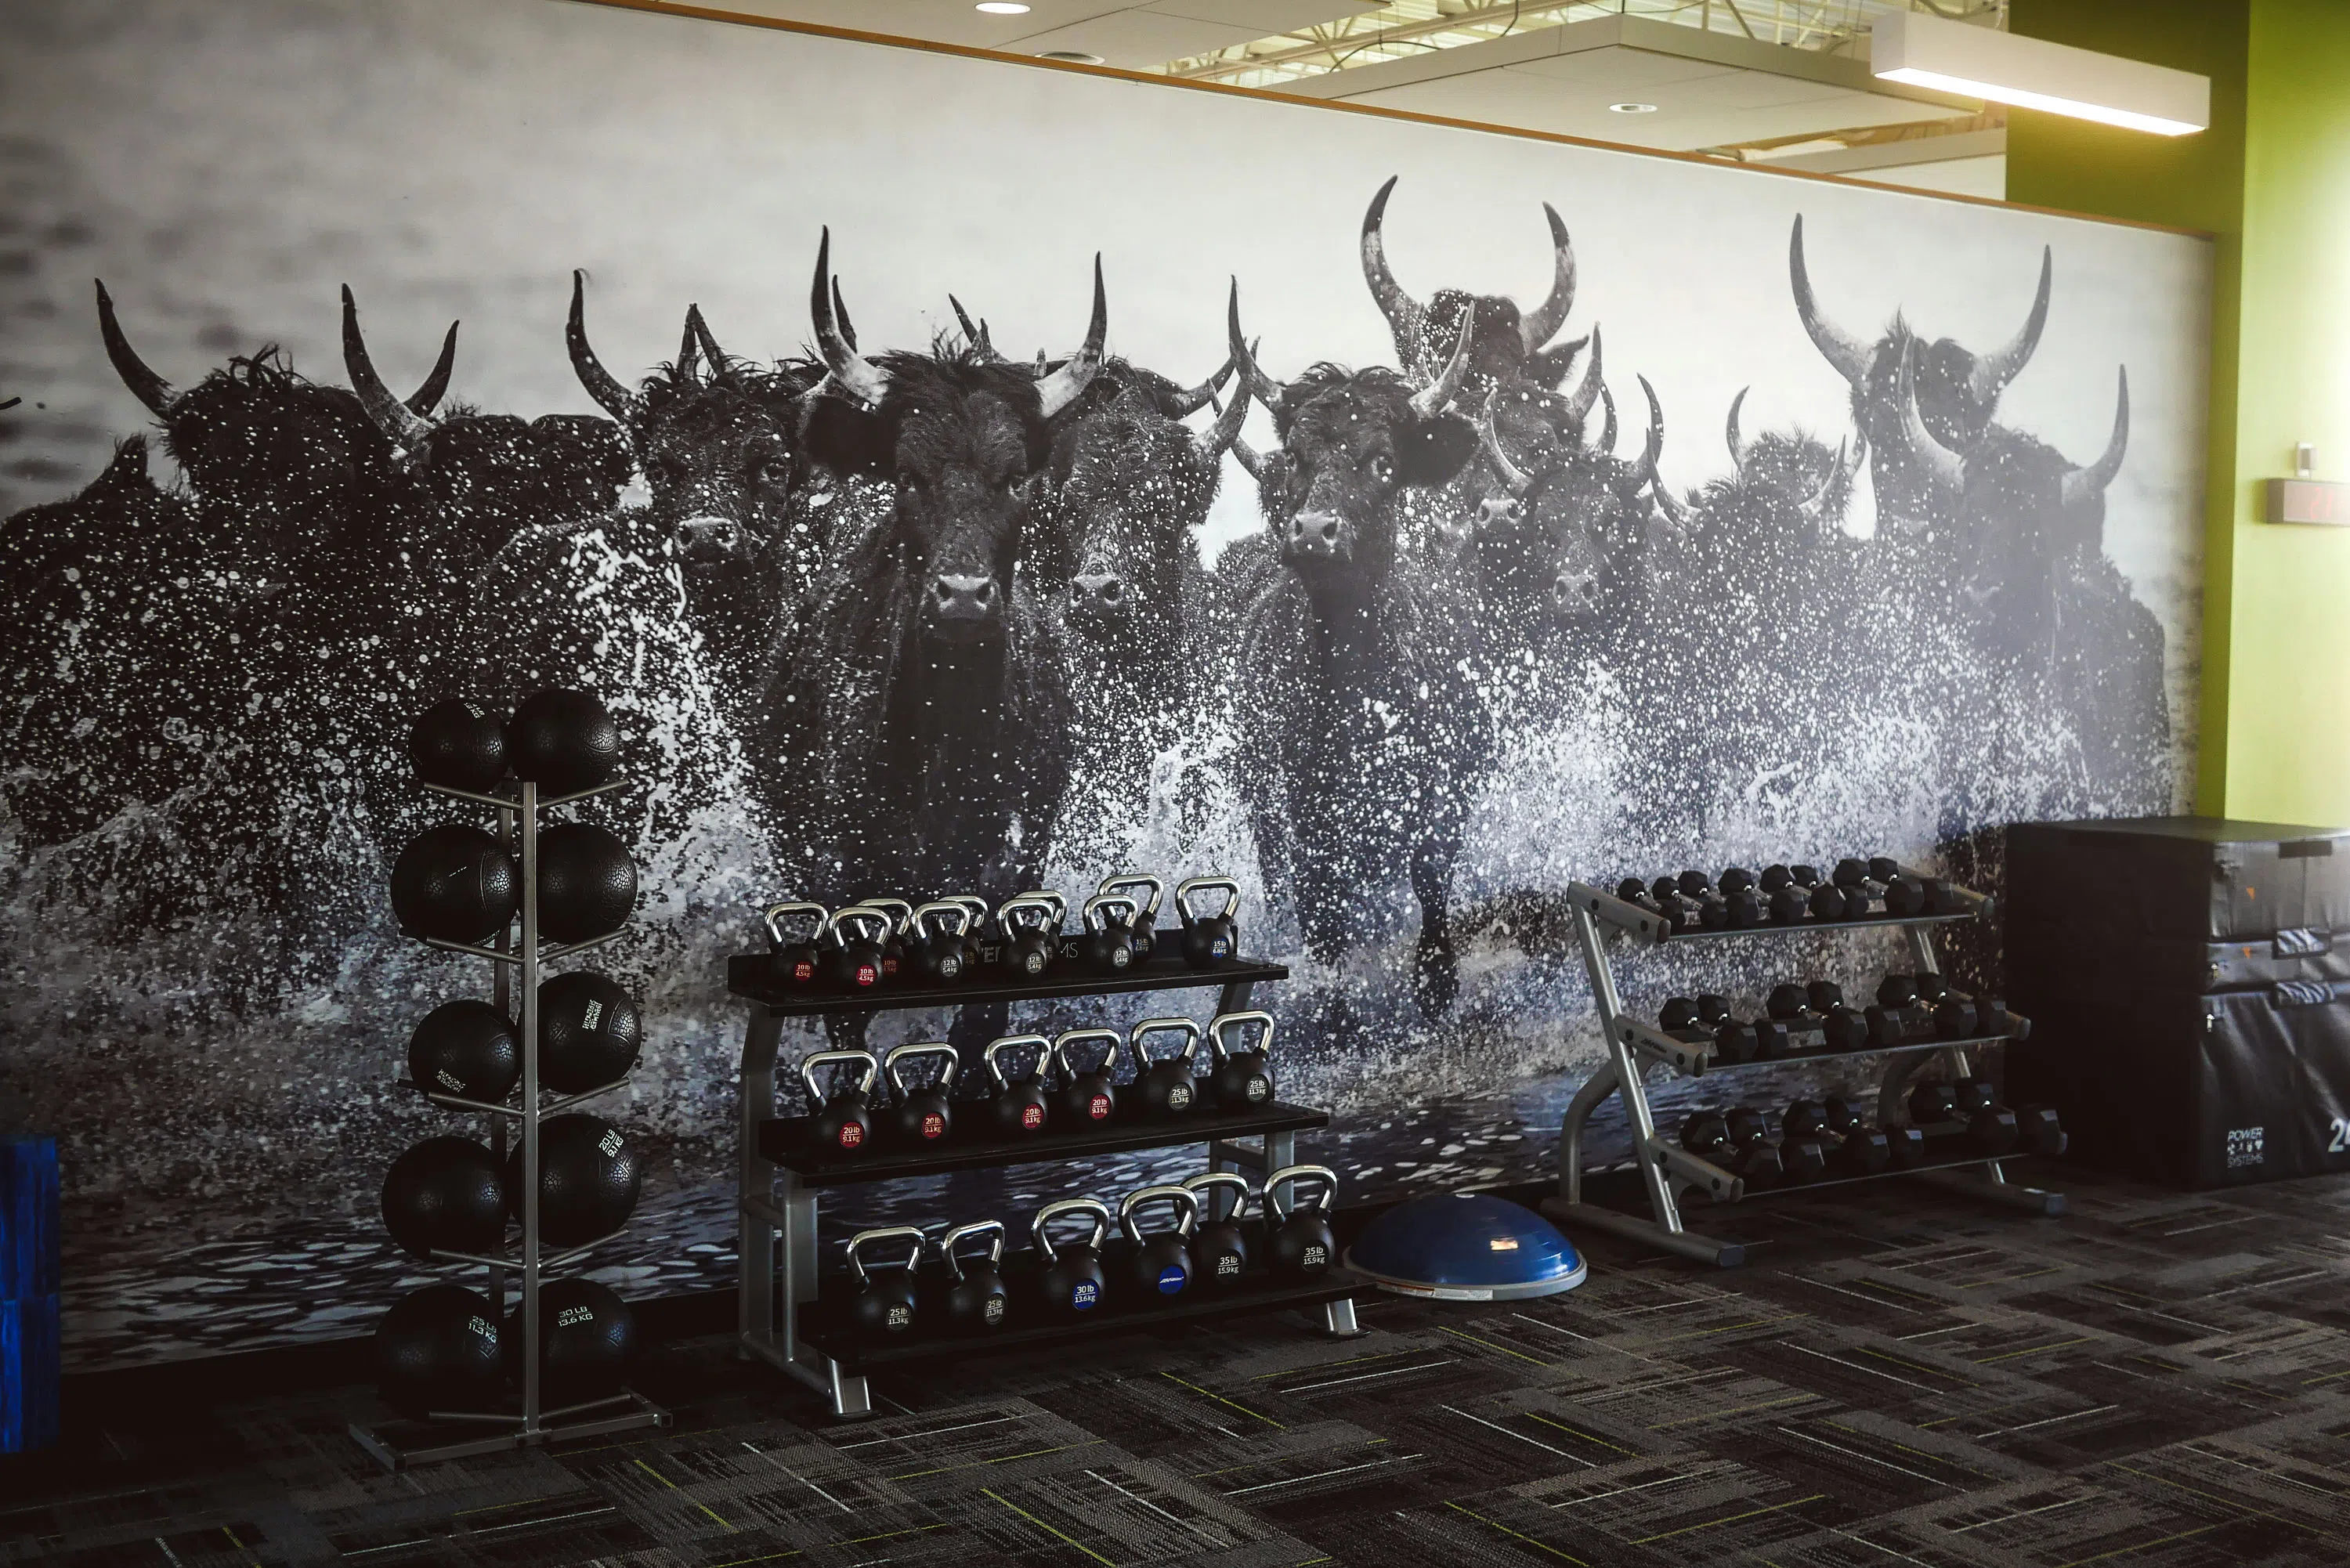 Racks of weights at The Fit.